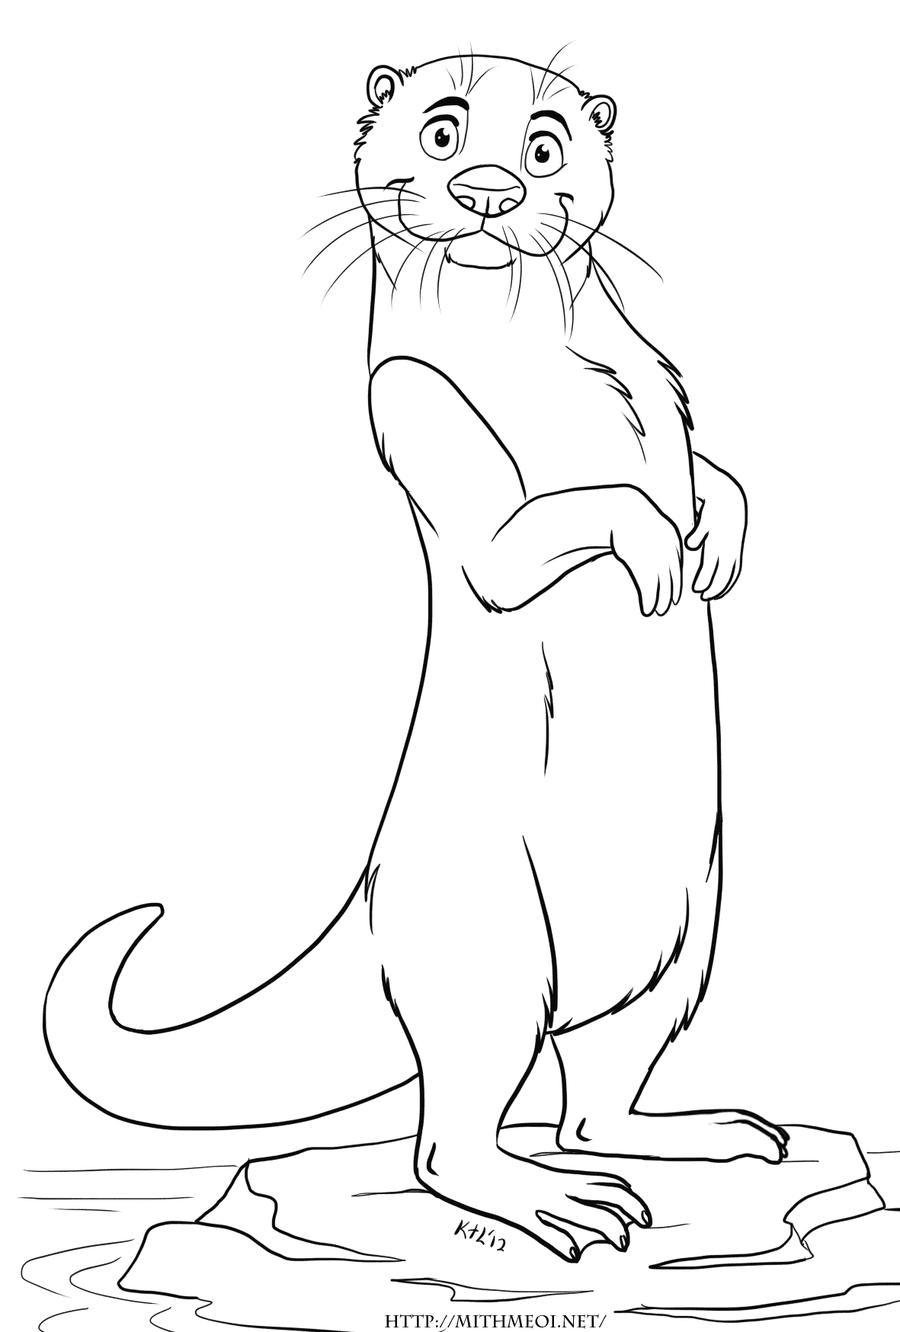 Cute Sea Otter Free Printable Coloring Page